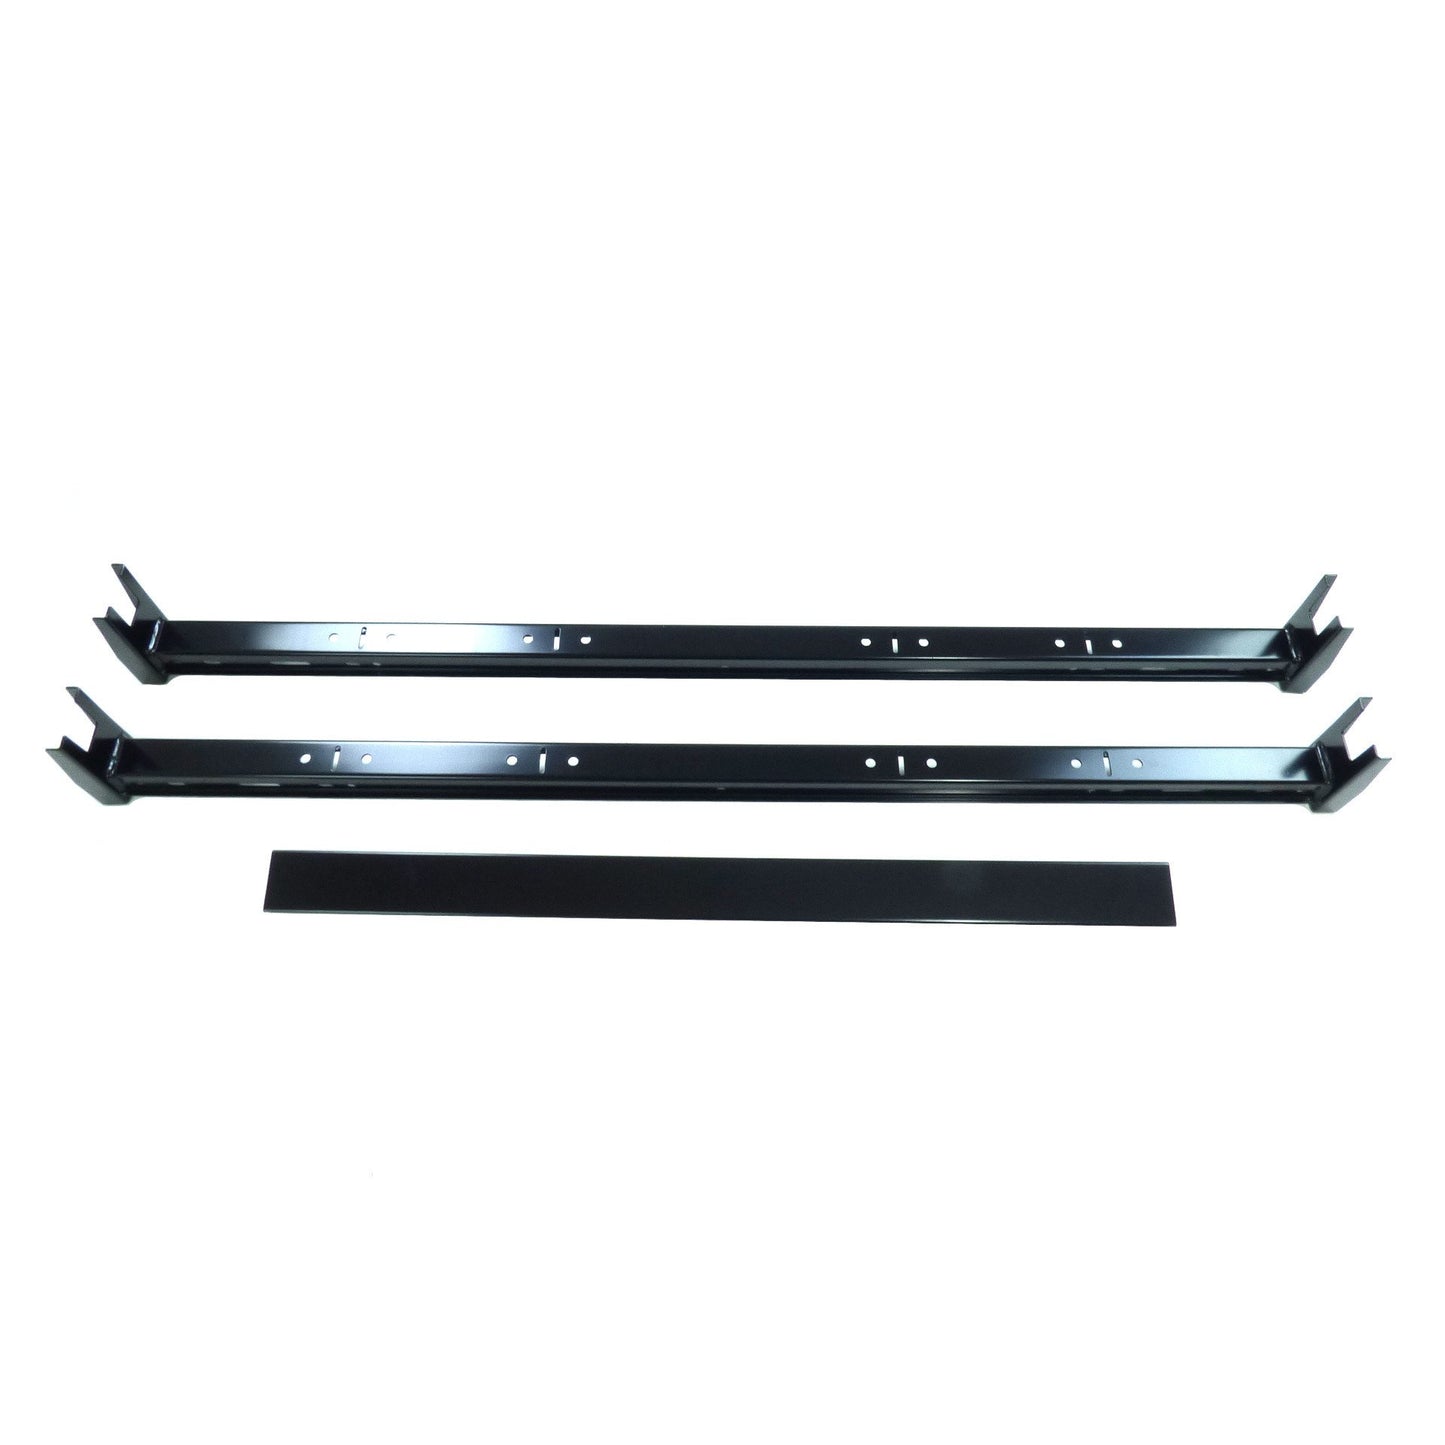 Black 2 Bar Van Roof Ladder Rack Cross Bars for Vauxhall Combo 2015-2019 -  - sold by Direct4x4